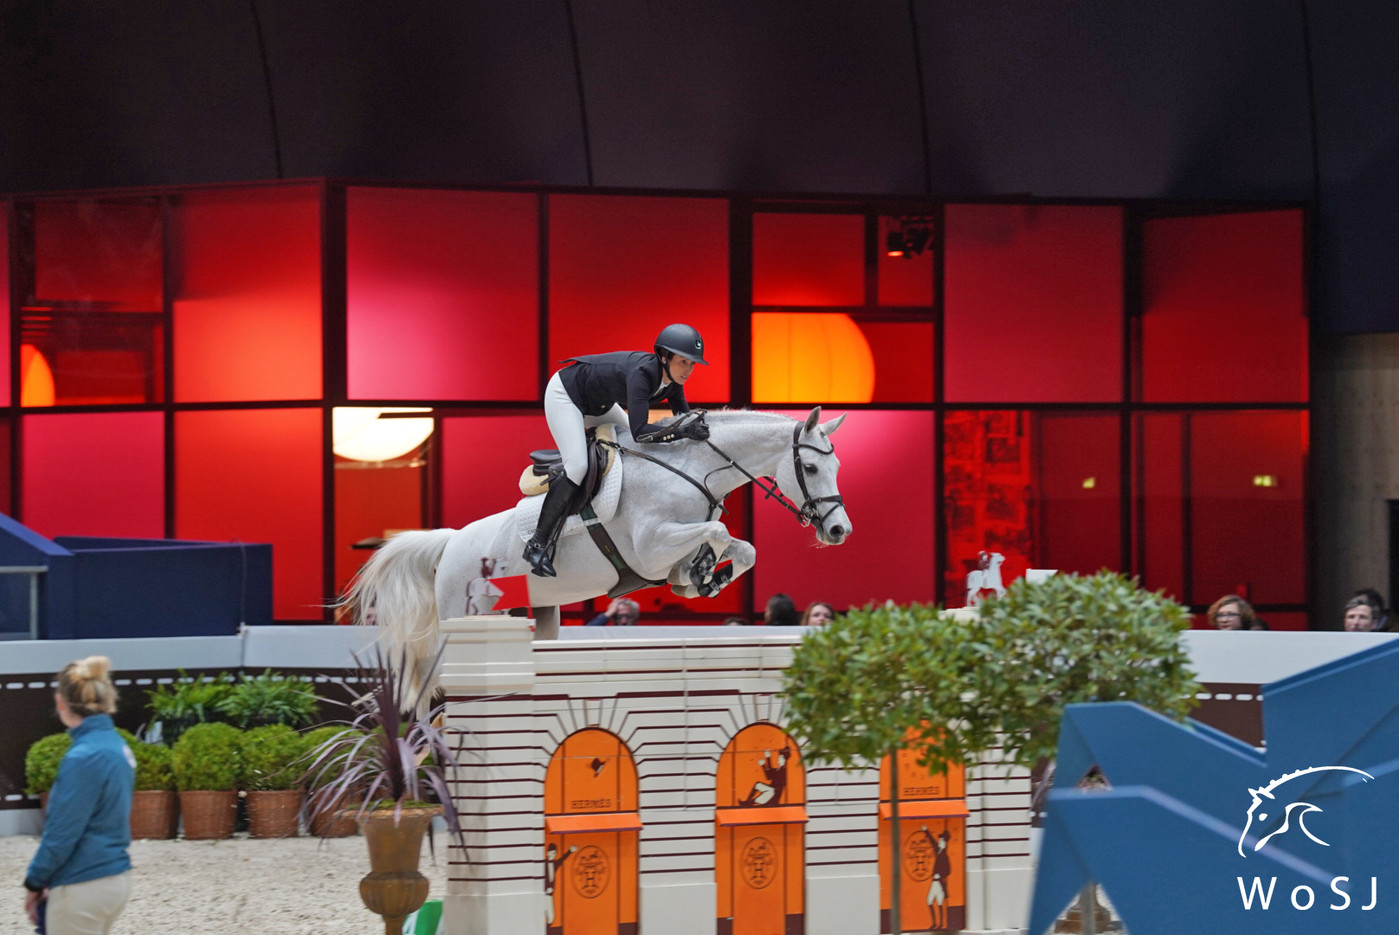 A Look Inside a Weekend of Equestrian Sport and Style at the Saut Hermès